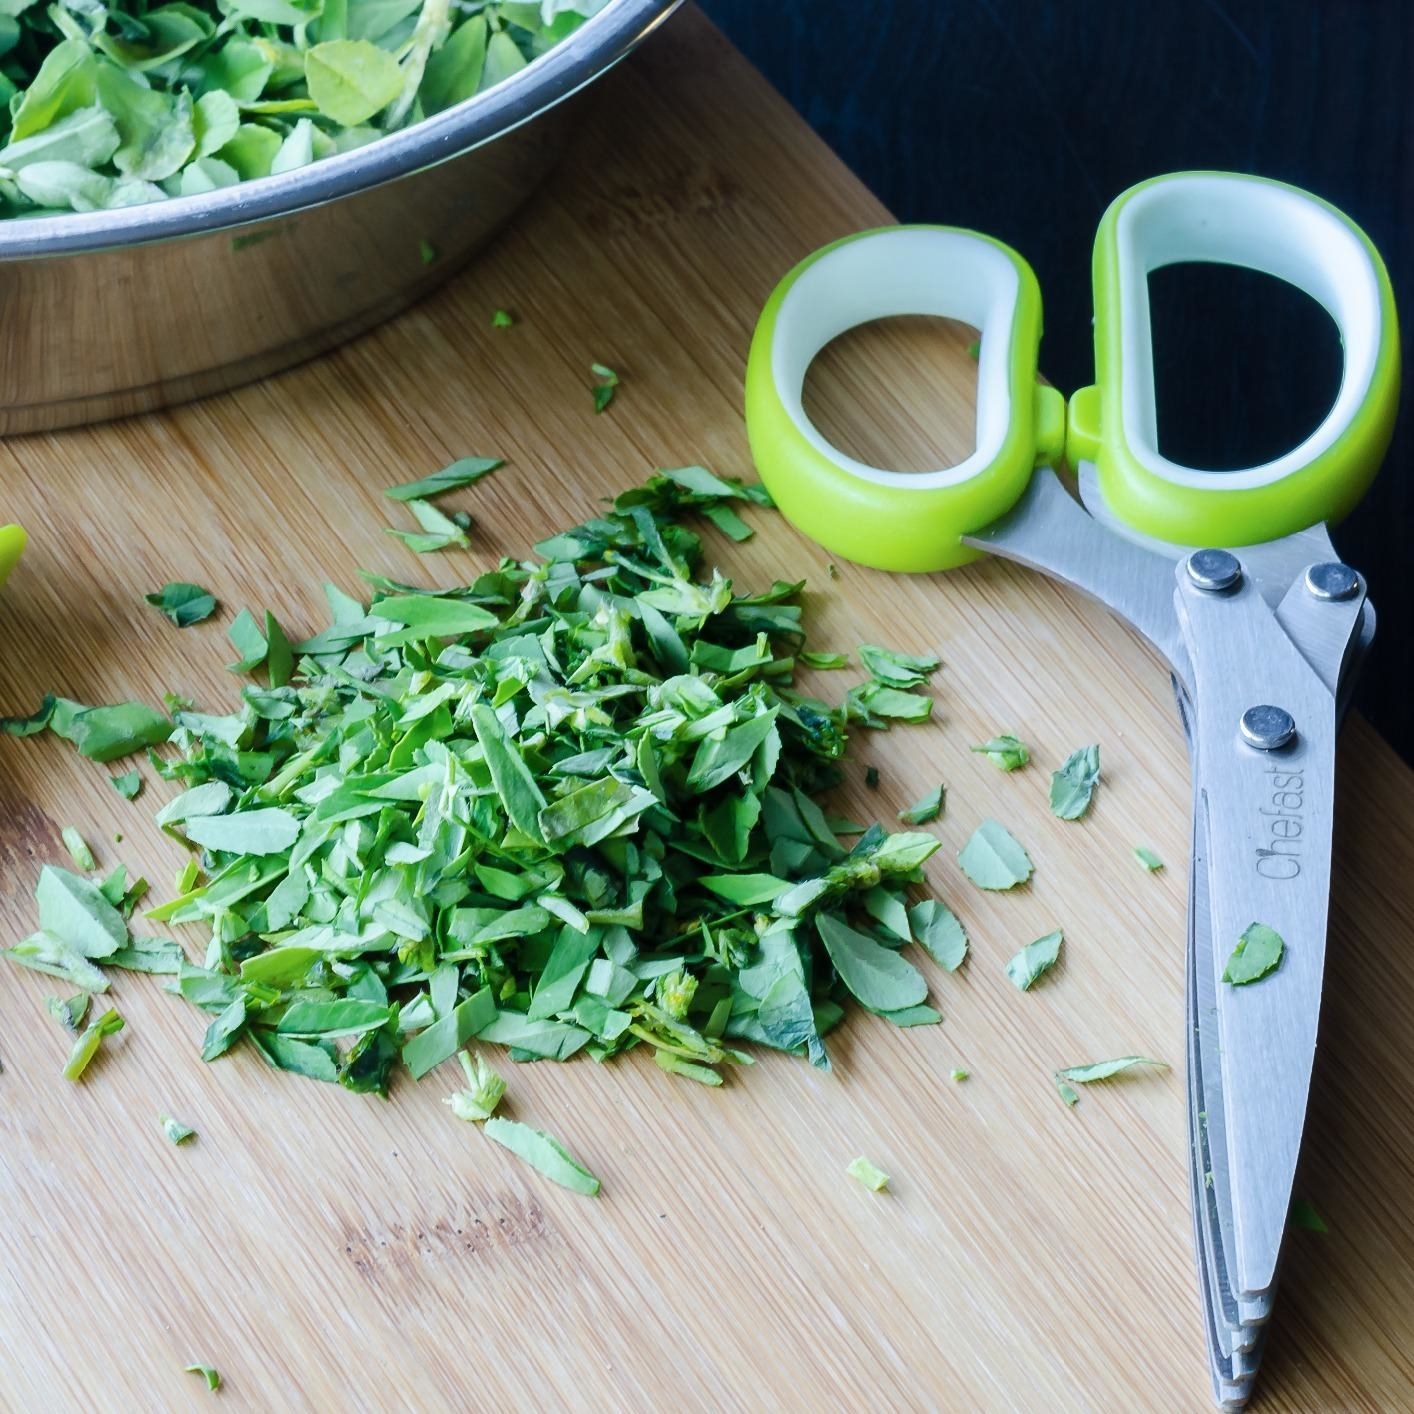 A pair of green herb scissors next to a pile of herbs on a wooden cutting board.